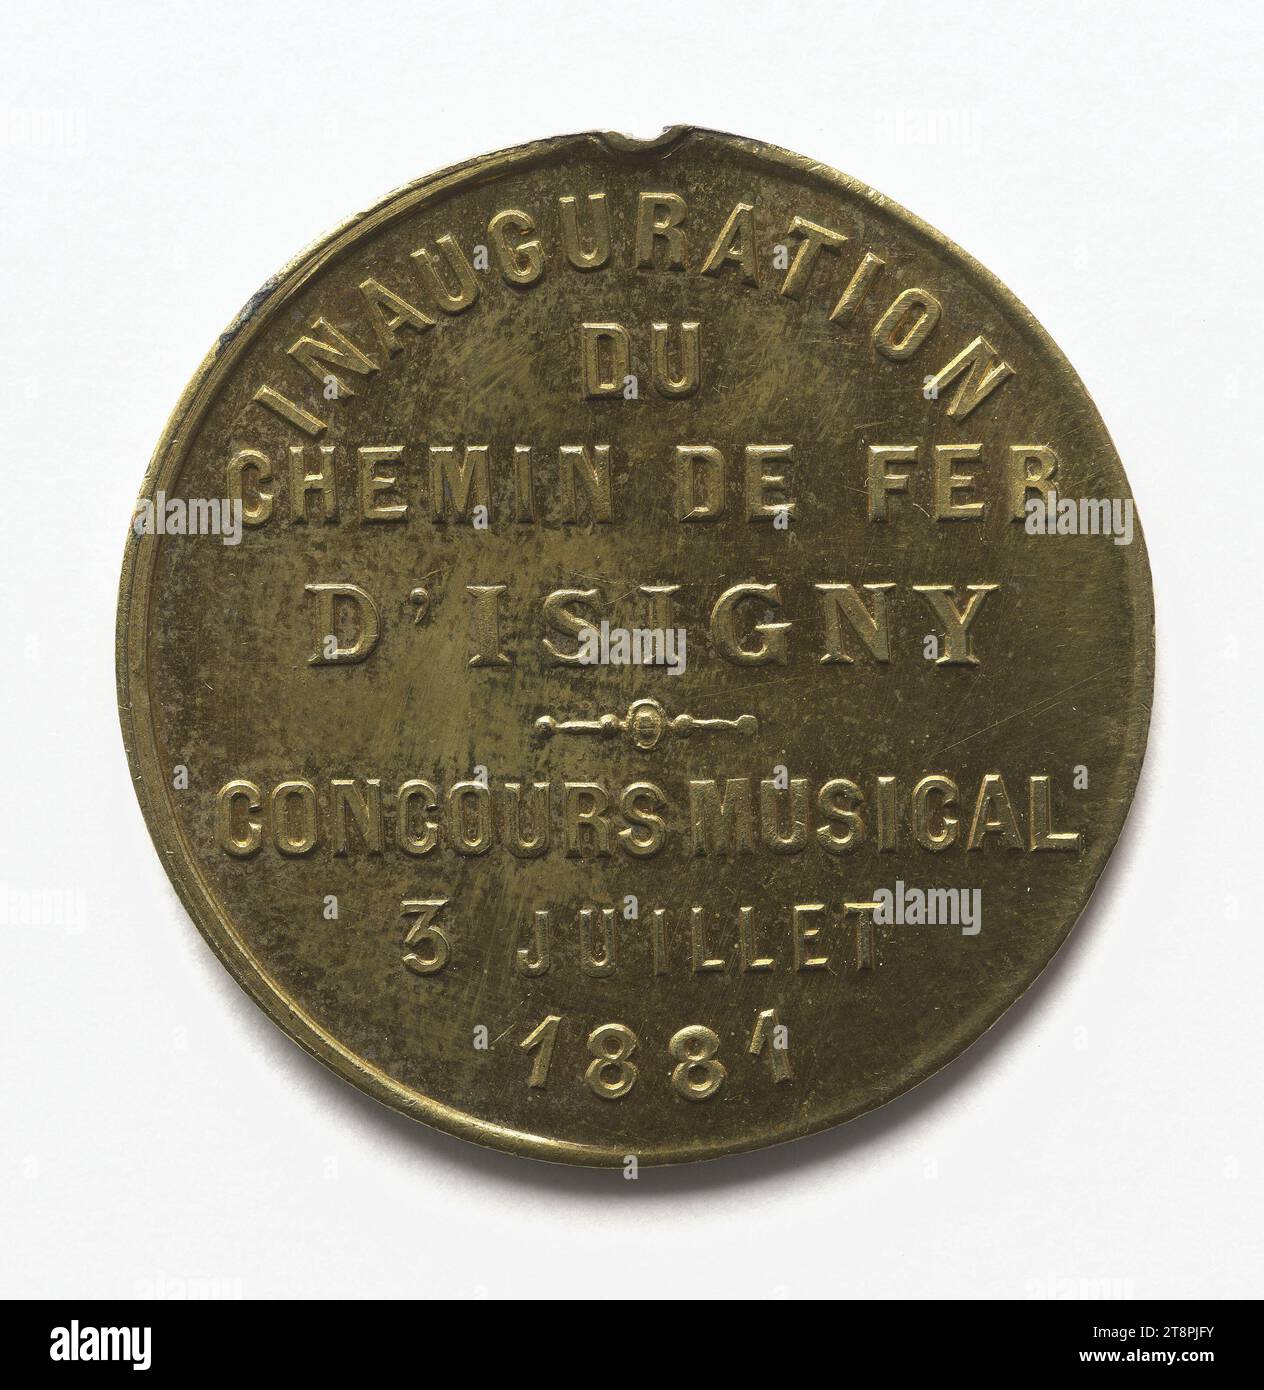 Inauguration of the railway of Isigny and musical contest, July 3, 1881, Array, Numismatic, Medal, Copper, Gilt = gilding, Dimensions - Work: Diameter: 3 cm, Weight (type dimension): 6.92 g Stock Photo